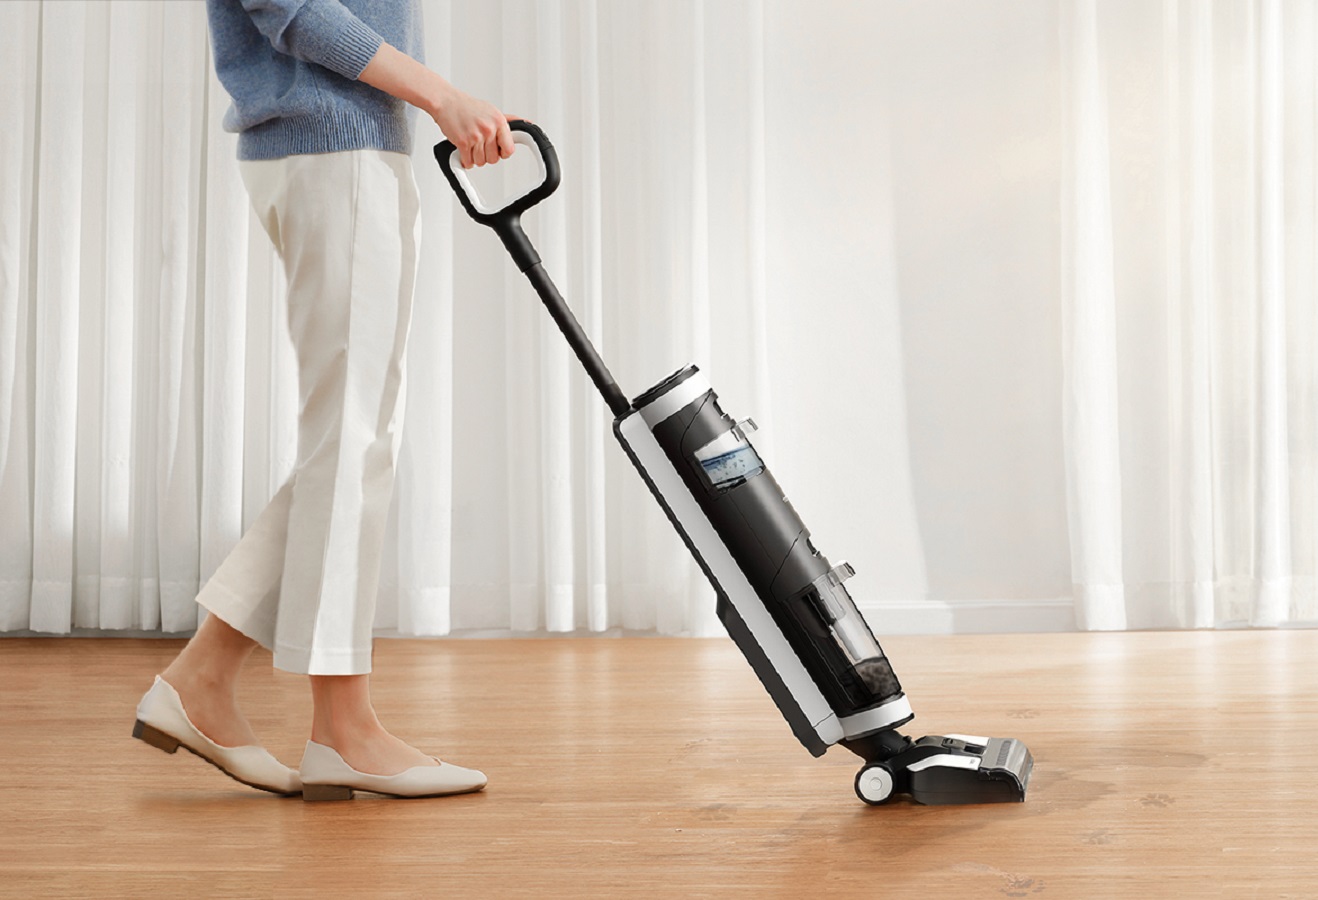 5 Best Cordless Vacuums for May 2022